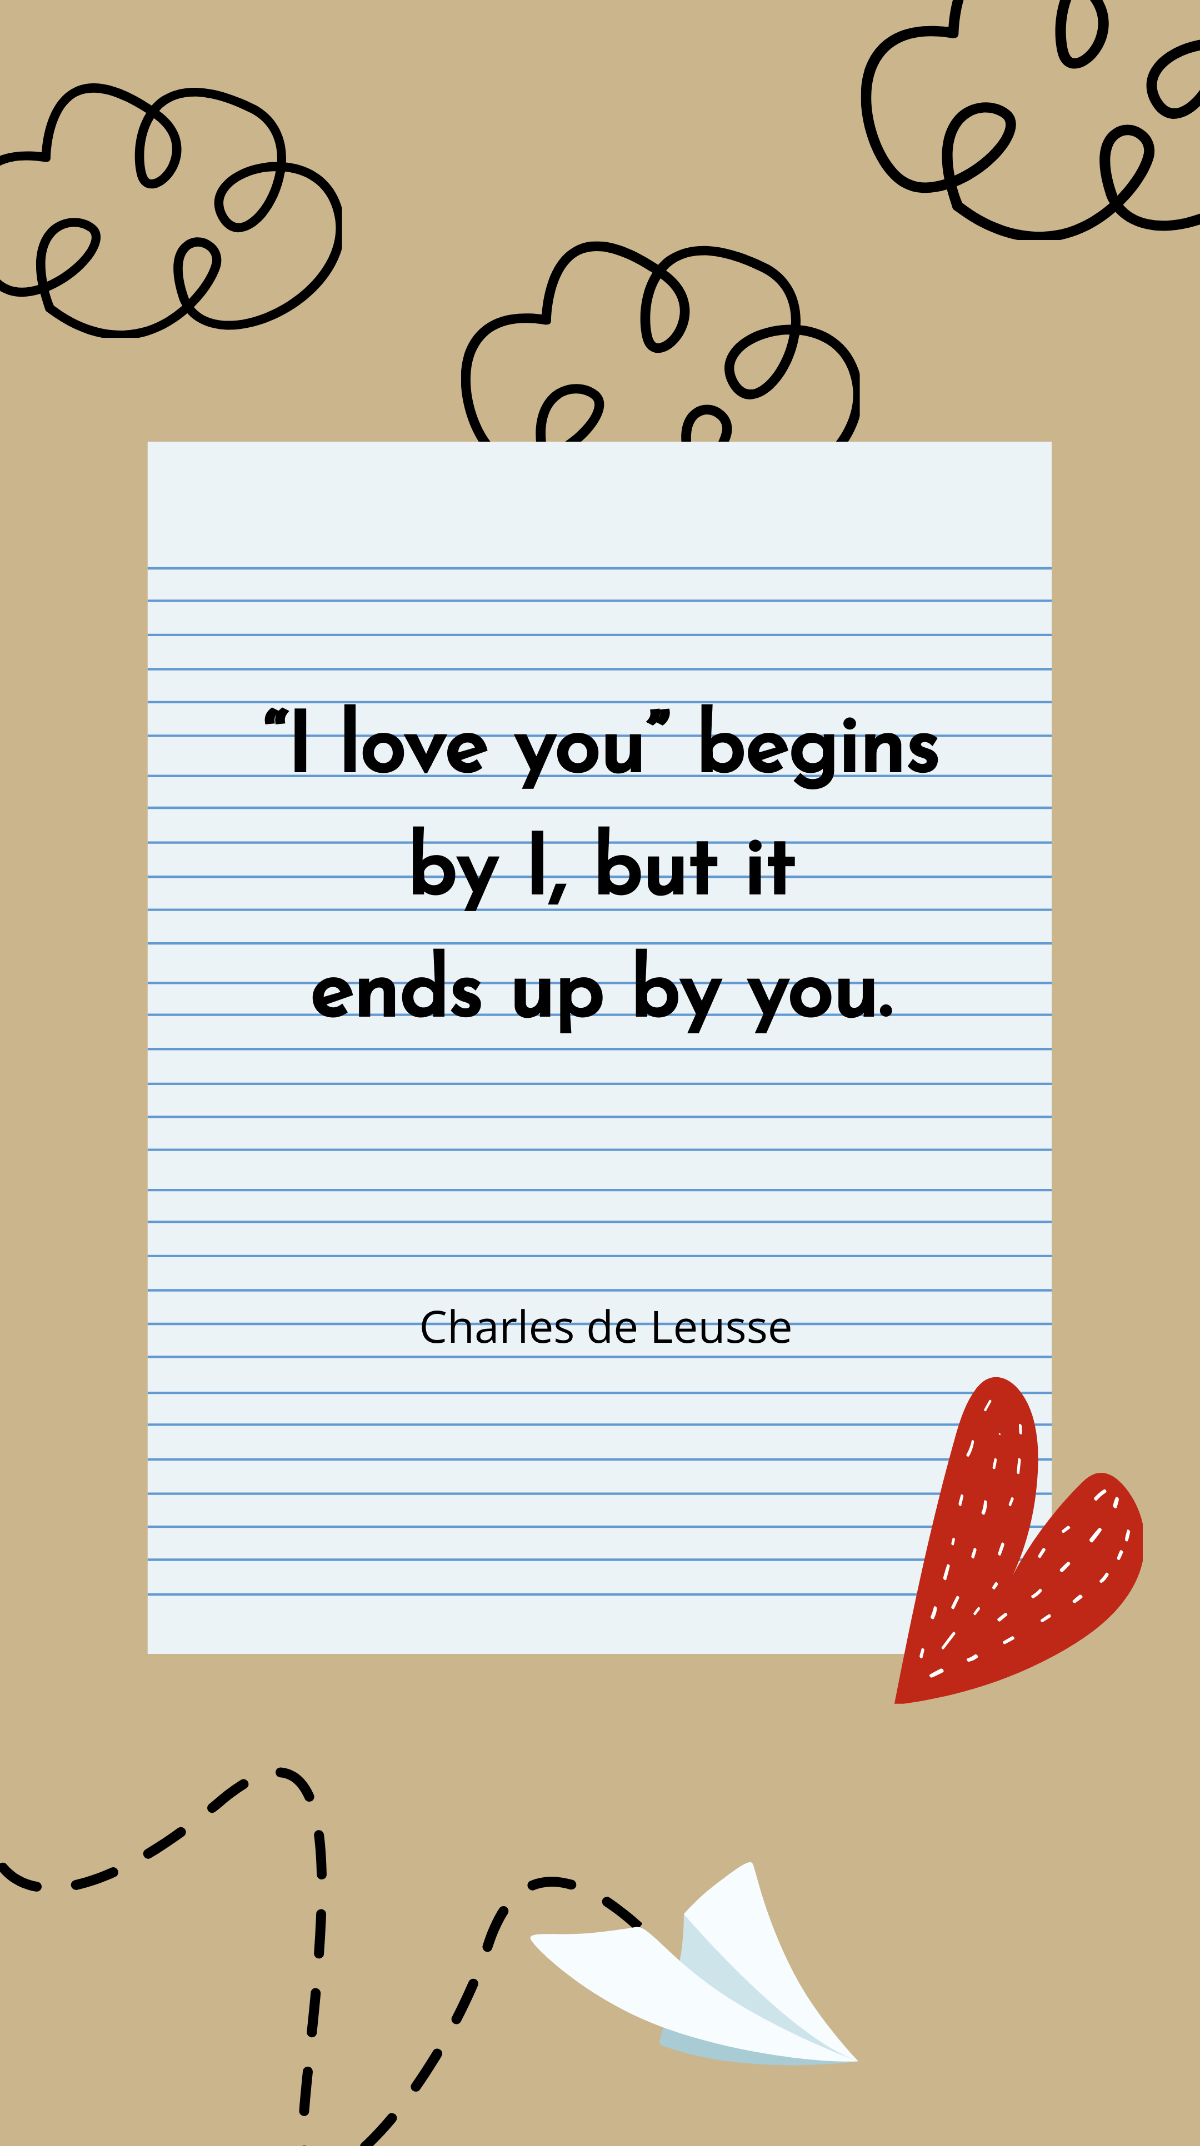 Charles de Leusse - “I love you” begins by I, but it ends up by you. Template